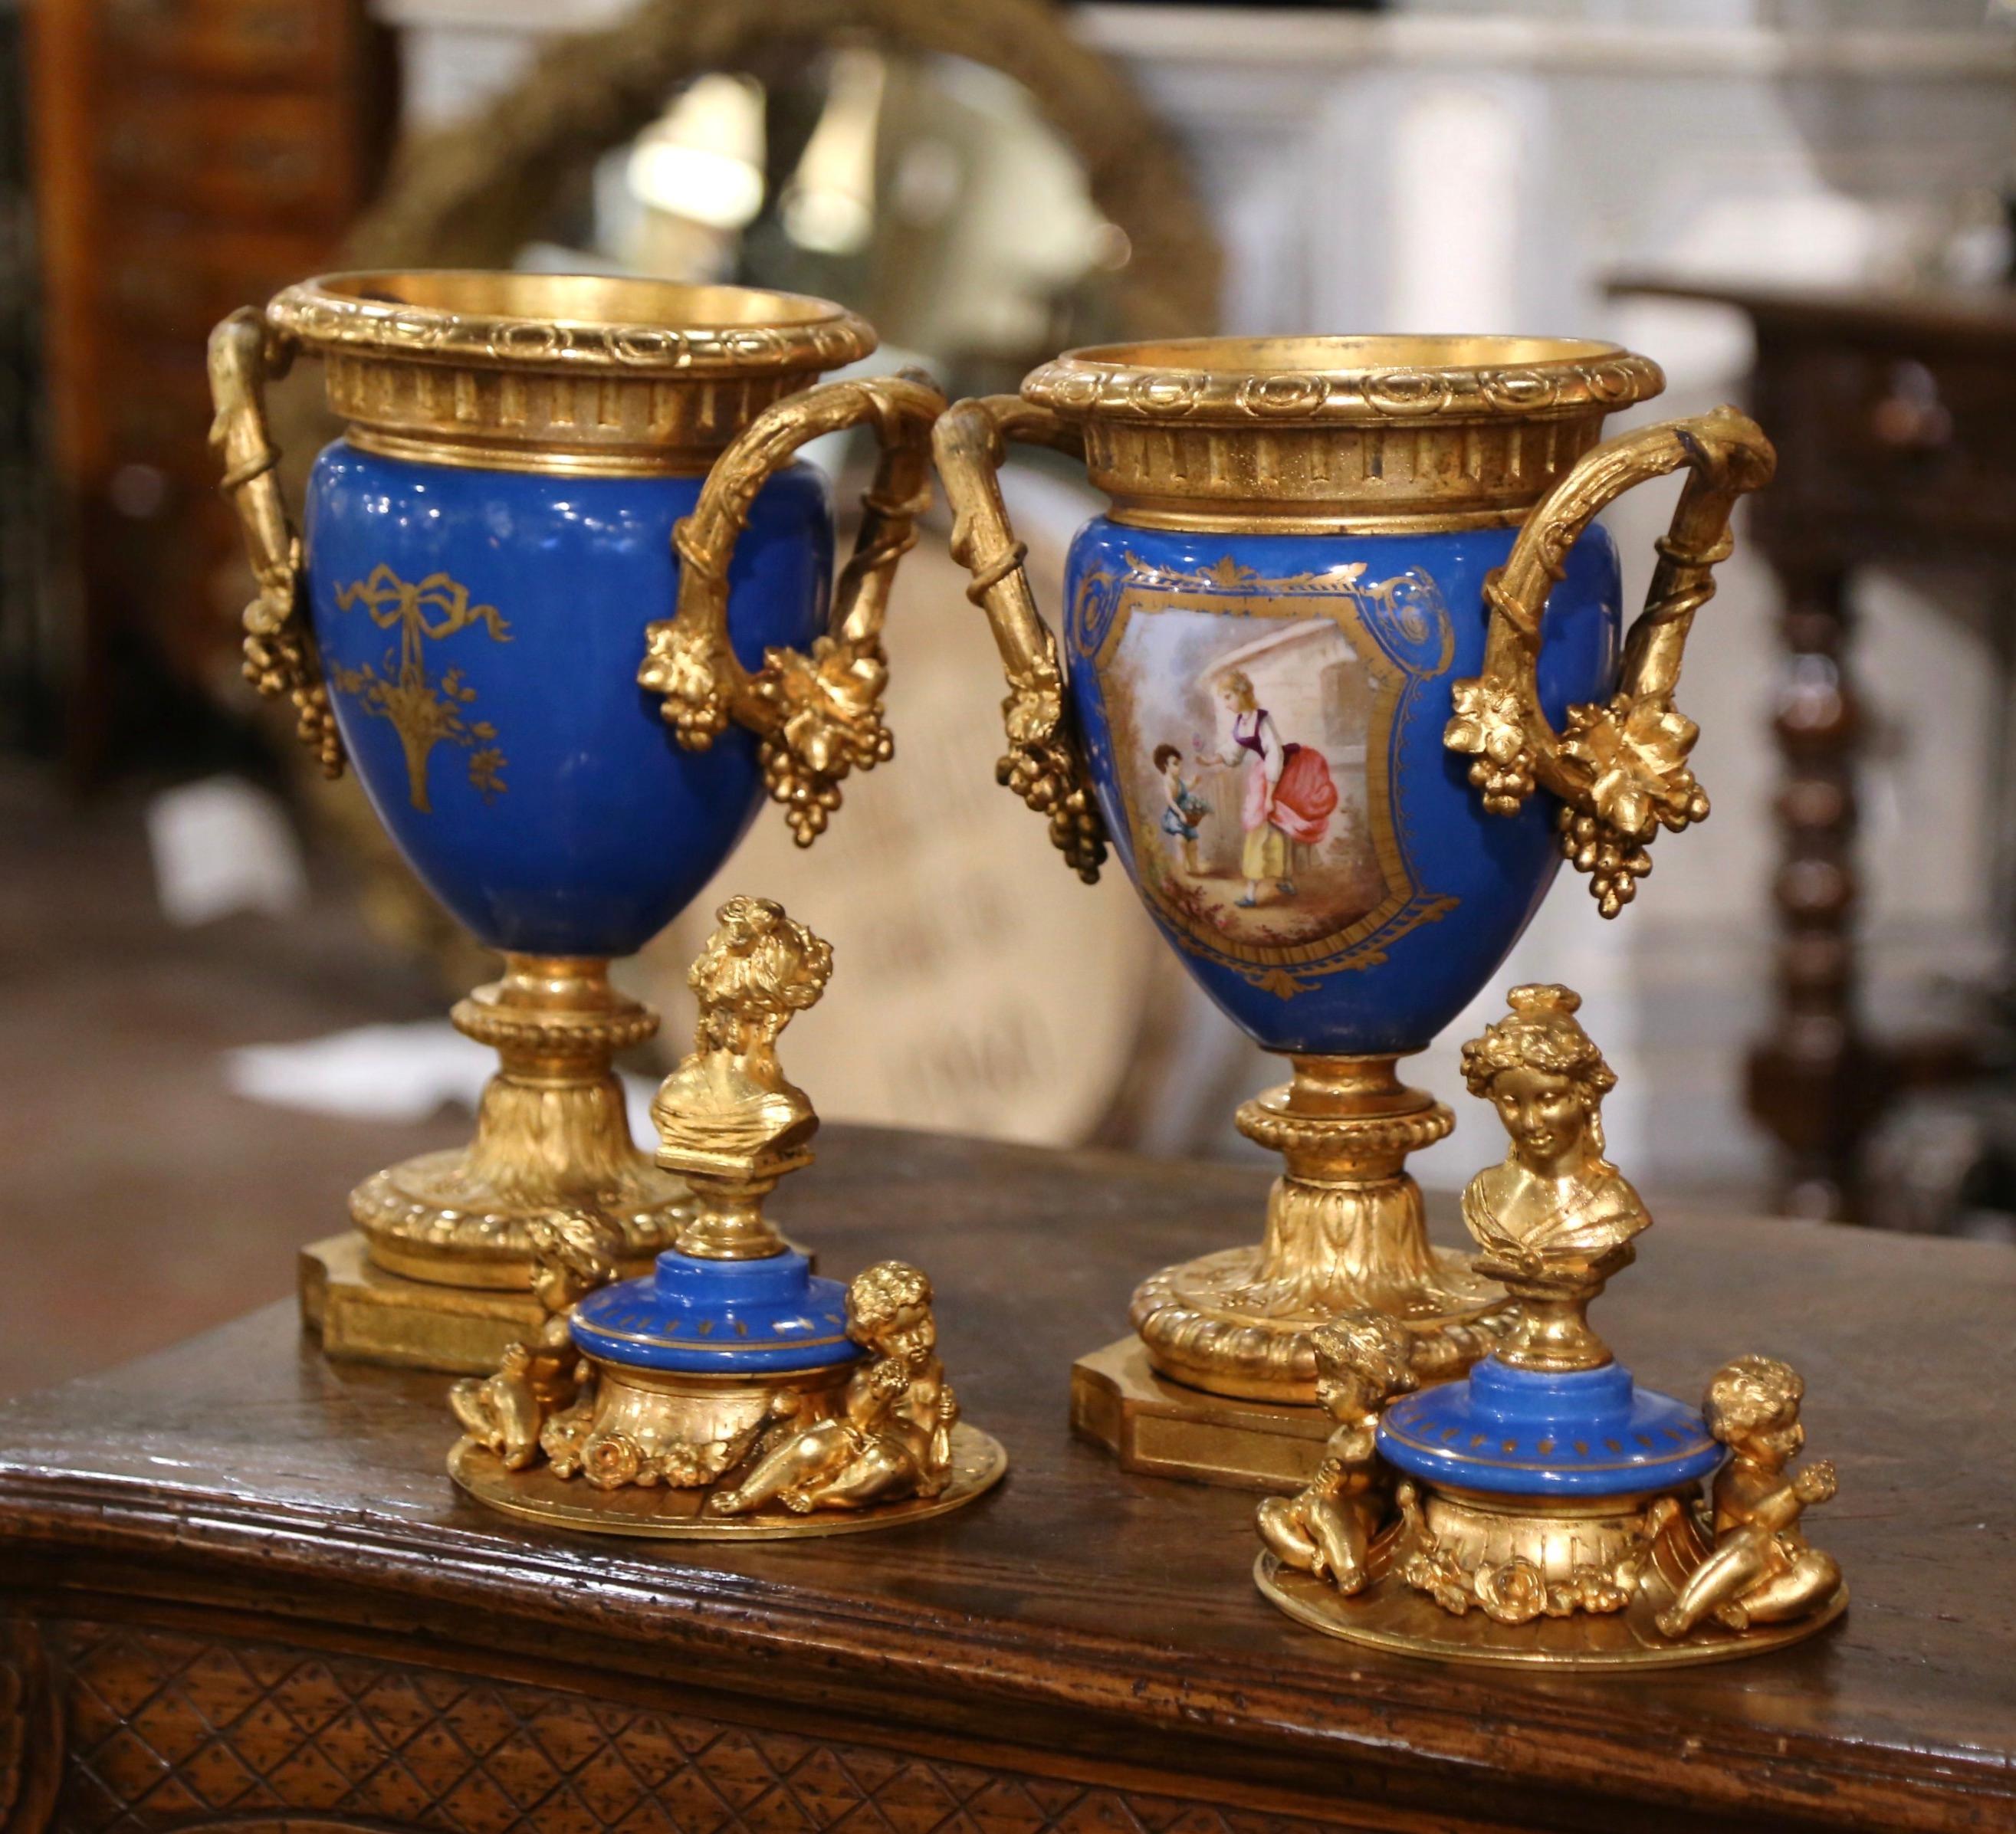 Pair of 19th Century French Blue Porcelain and Gilt Bronze Sèvres Urns Vases For Sale 8